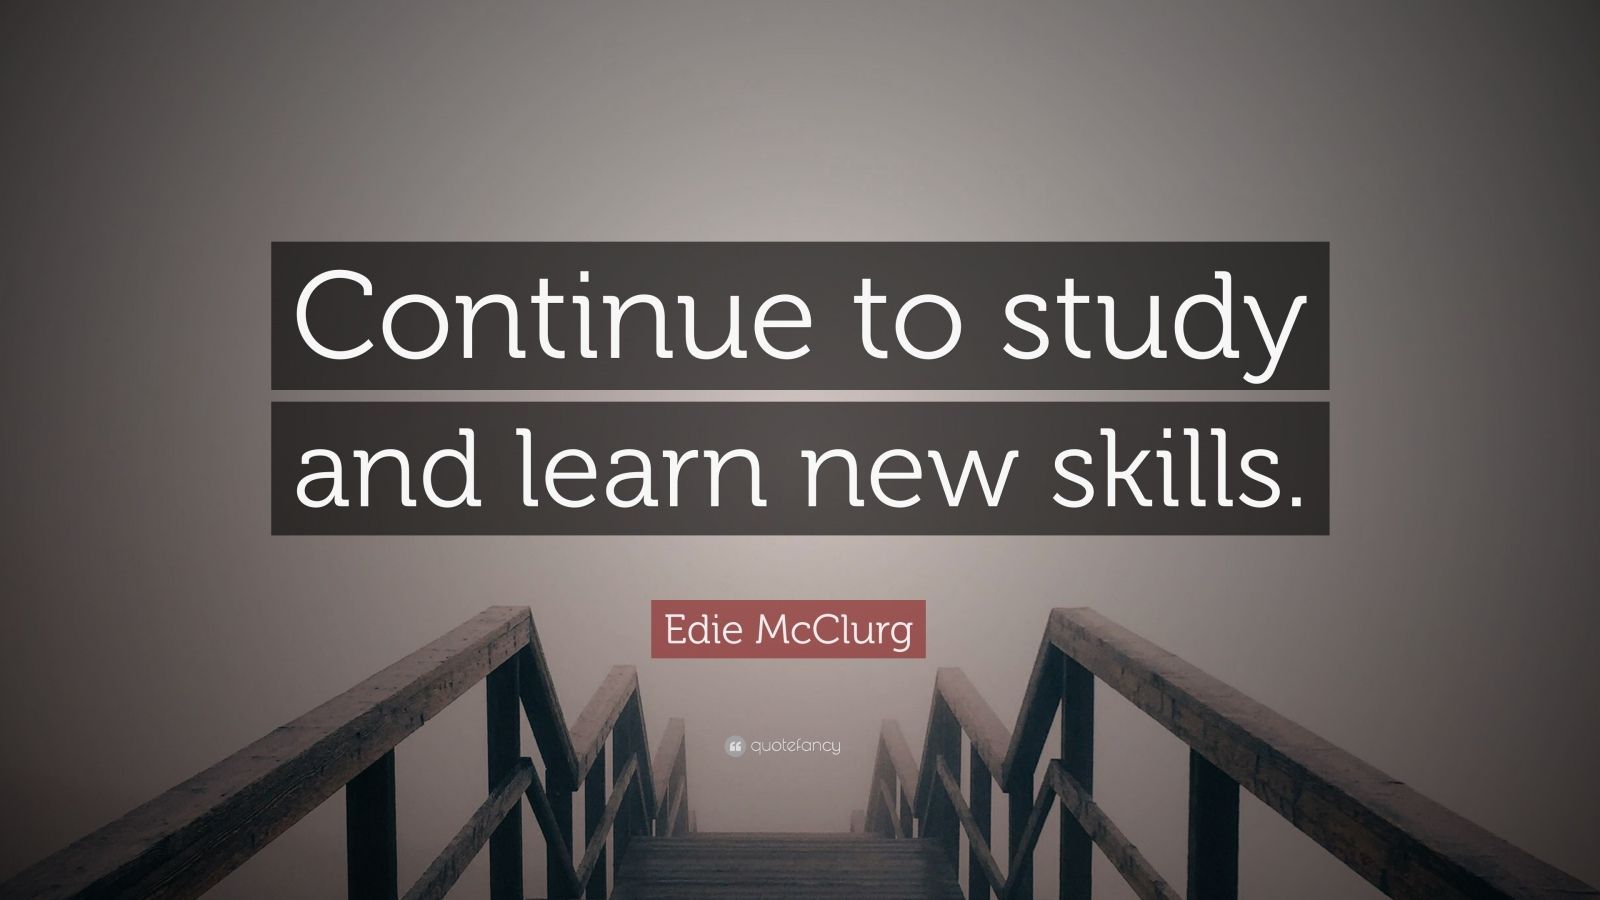 Edie McClurg Quote: “Continue to study and learn new skills.” (12